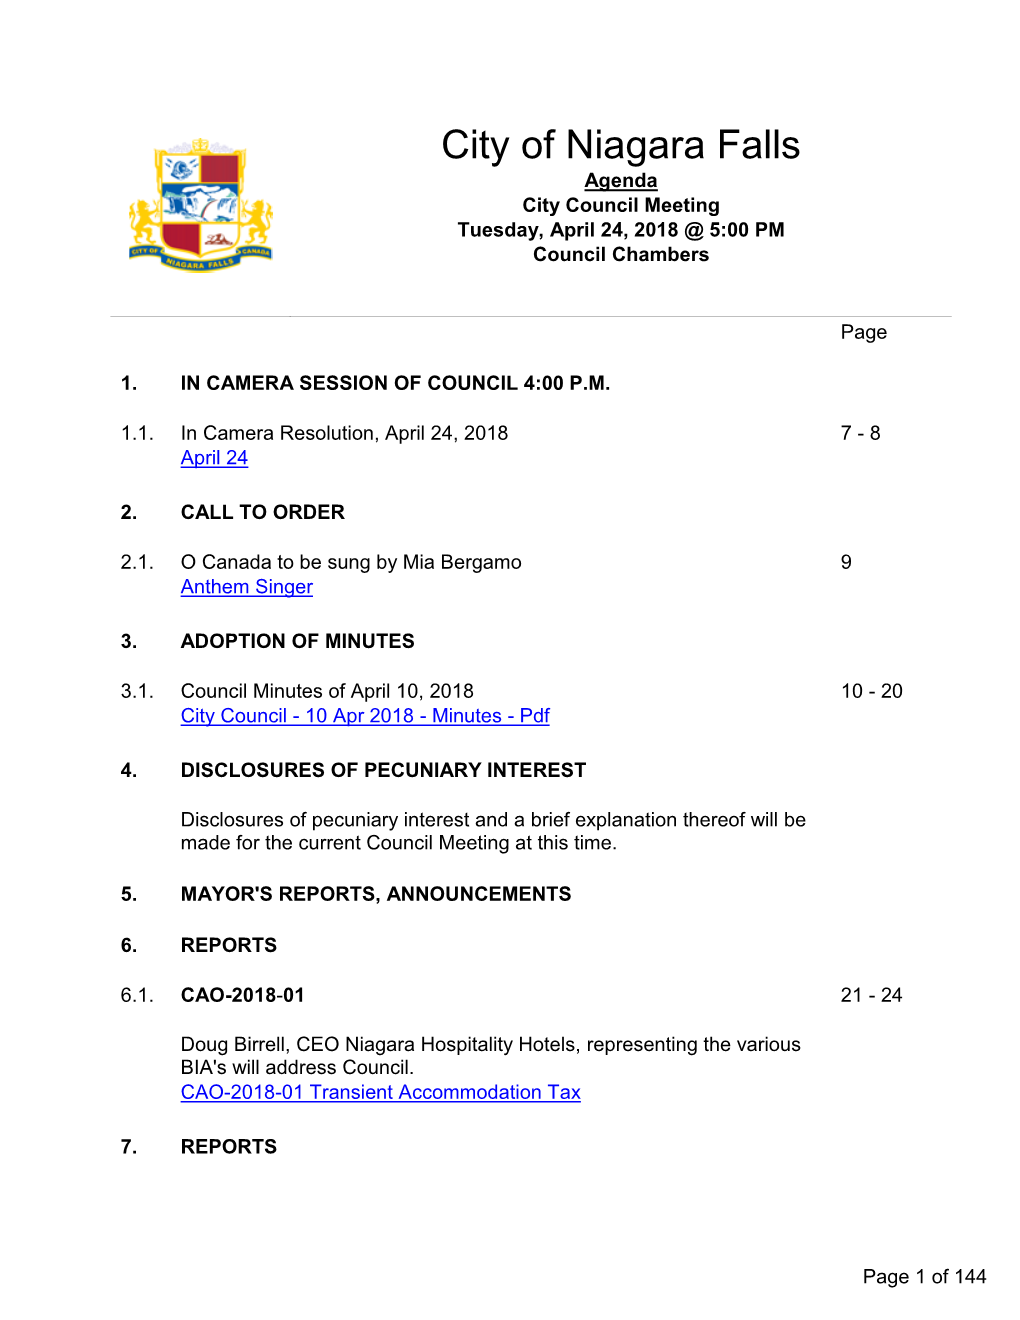 City Council Meeting Tuesday, April 24, 2018 @ 5:00 PM Council Chambers